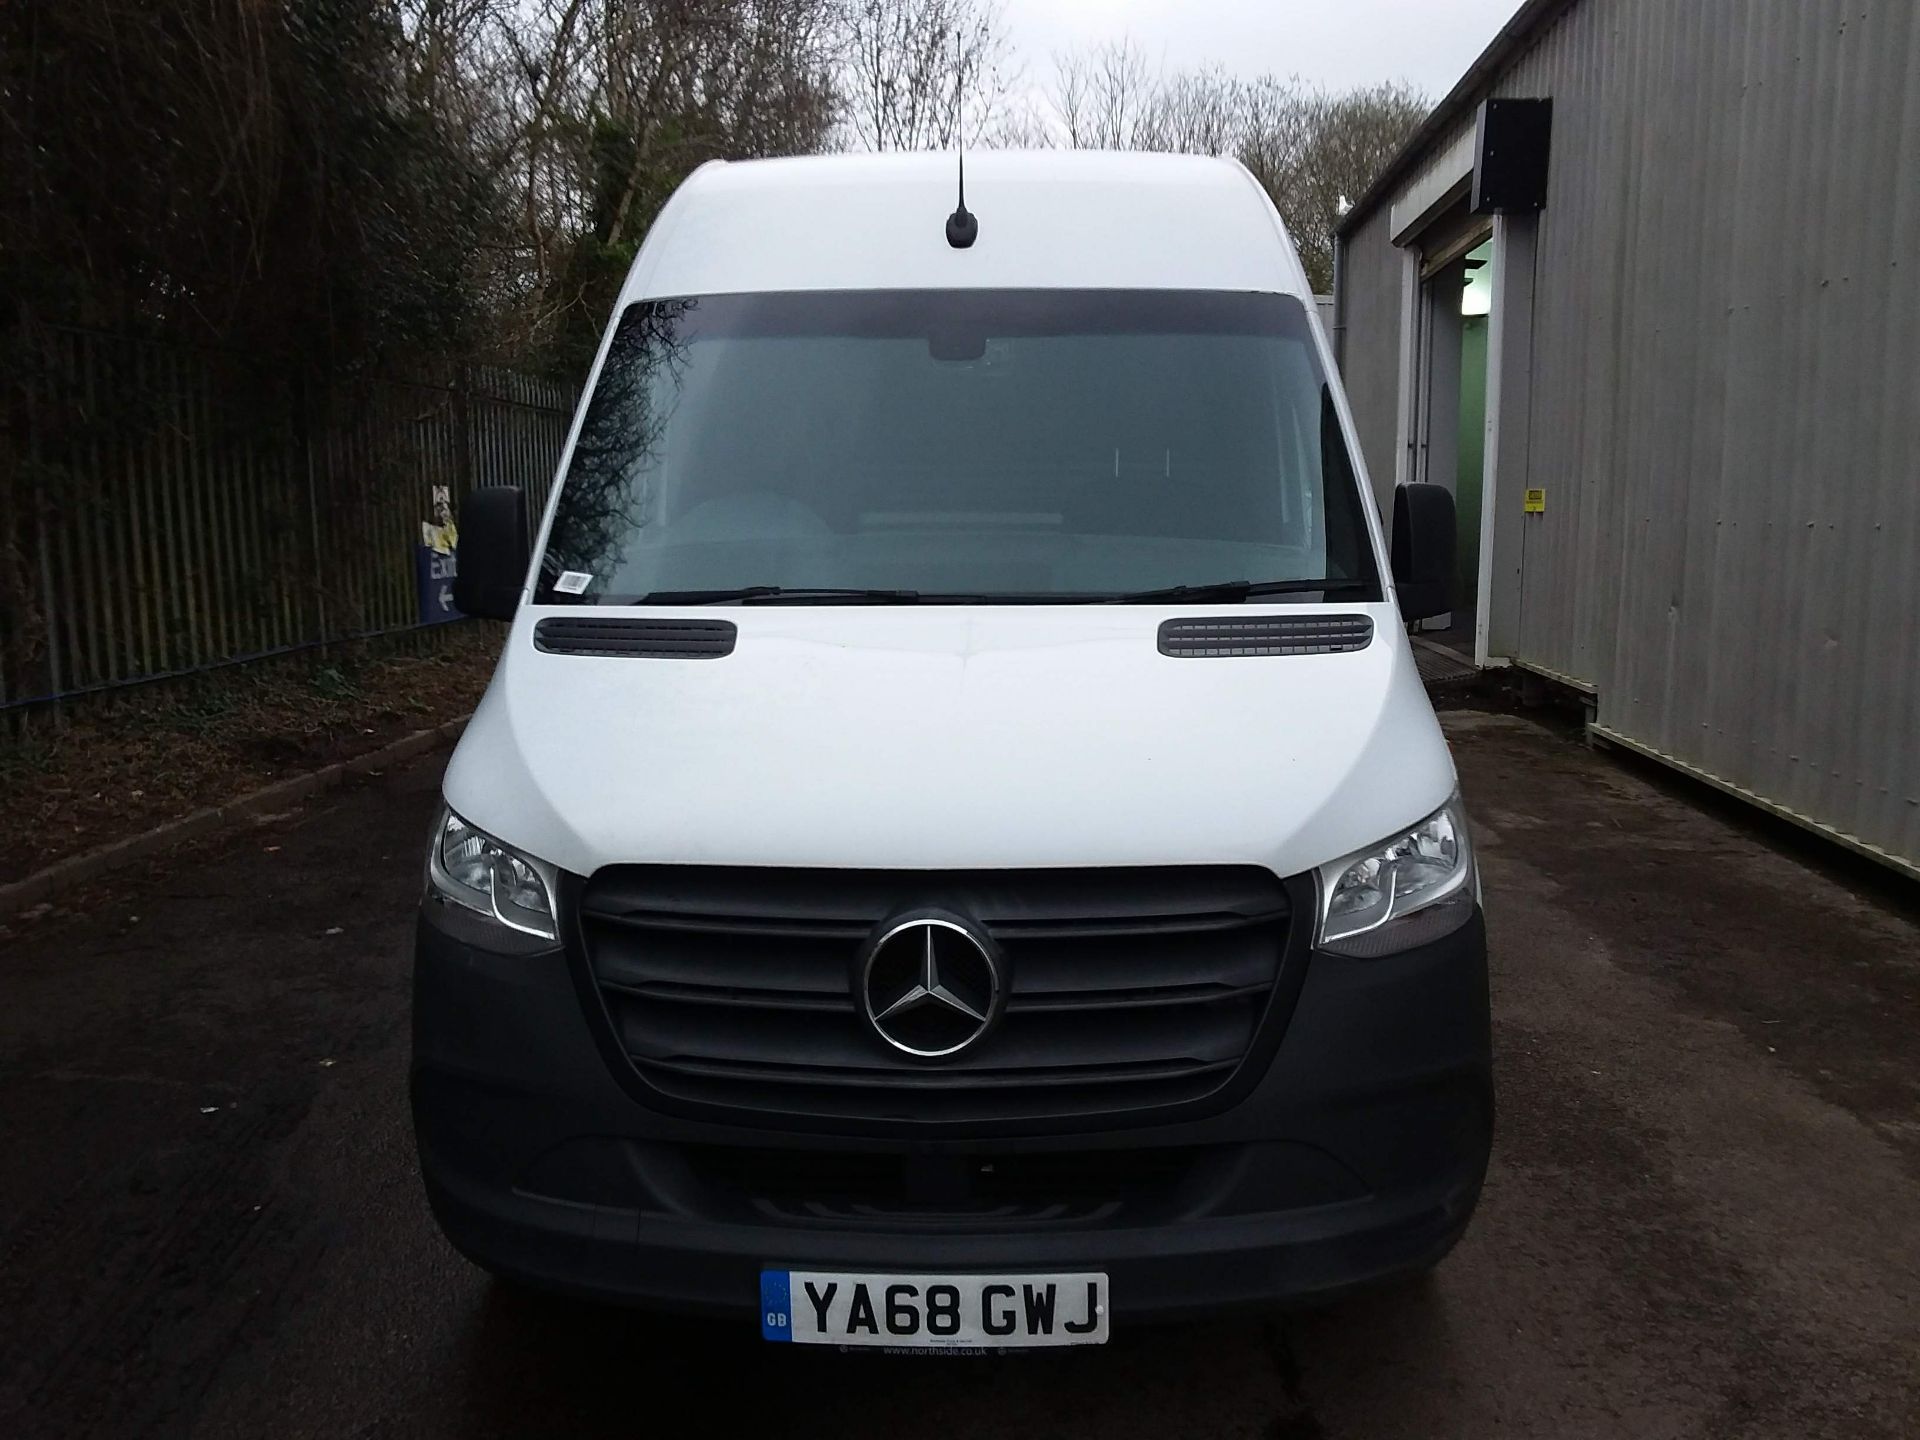 MERCEDES SPRINTER CDI "LWB HIGH ROOF" 2019 MODEL - ONLY 50K MILES!! CRUISE CONTROL (NEW SHAPE) - Image 2 of 12